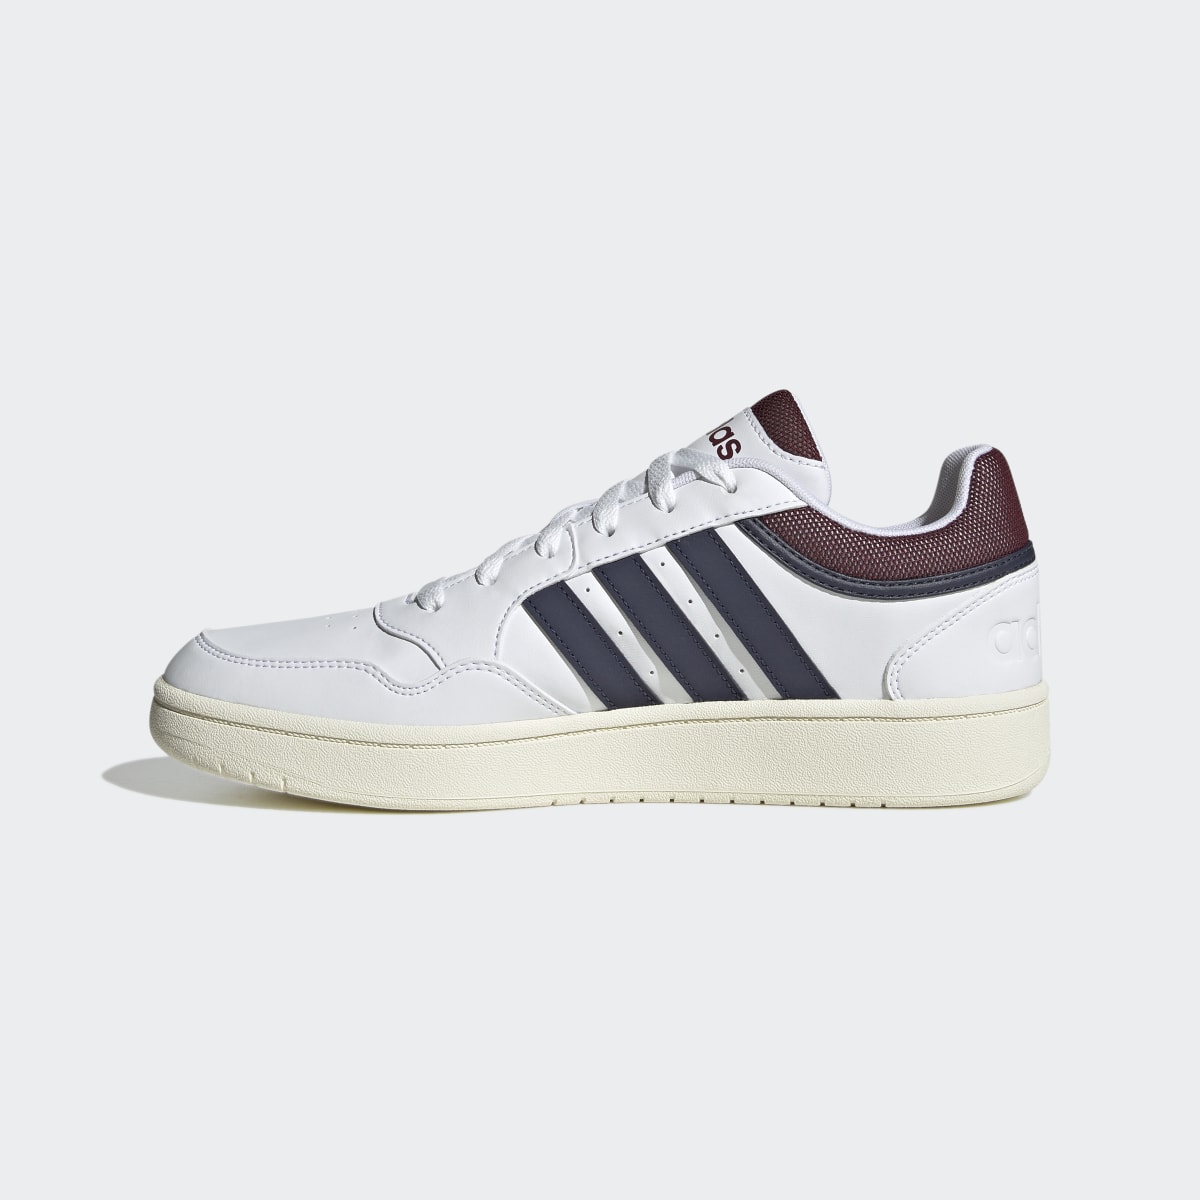 Adidas Chaussure Hoops 3.0 Low Classic Vintage. 7